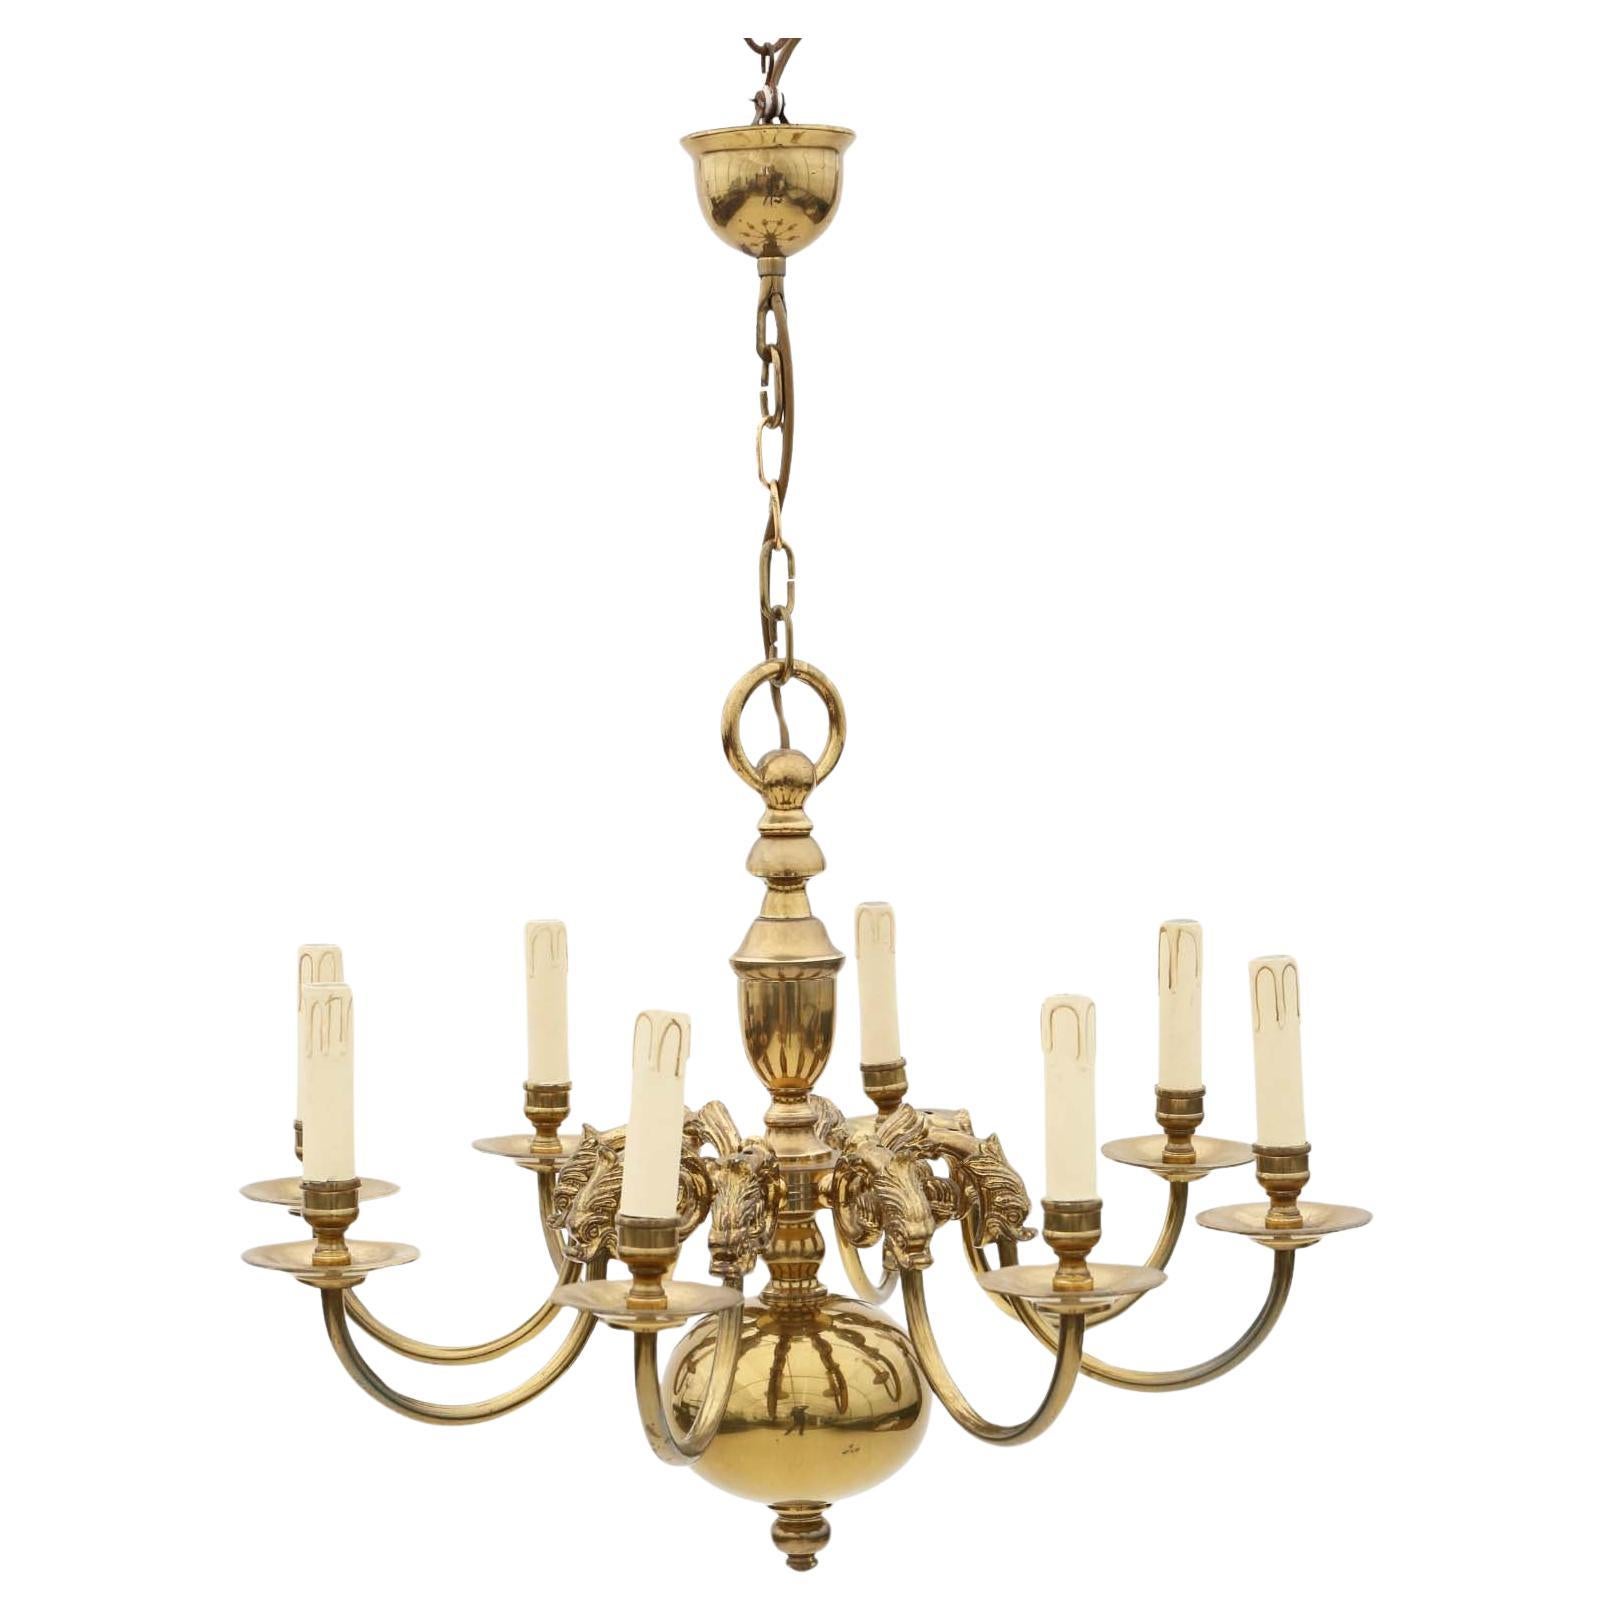 Antique Vintage Ormolu Brass Chandelier with 8 Lamps/Arms For Sale